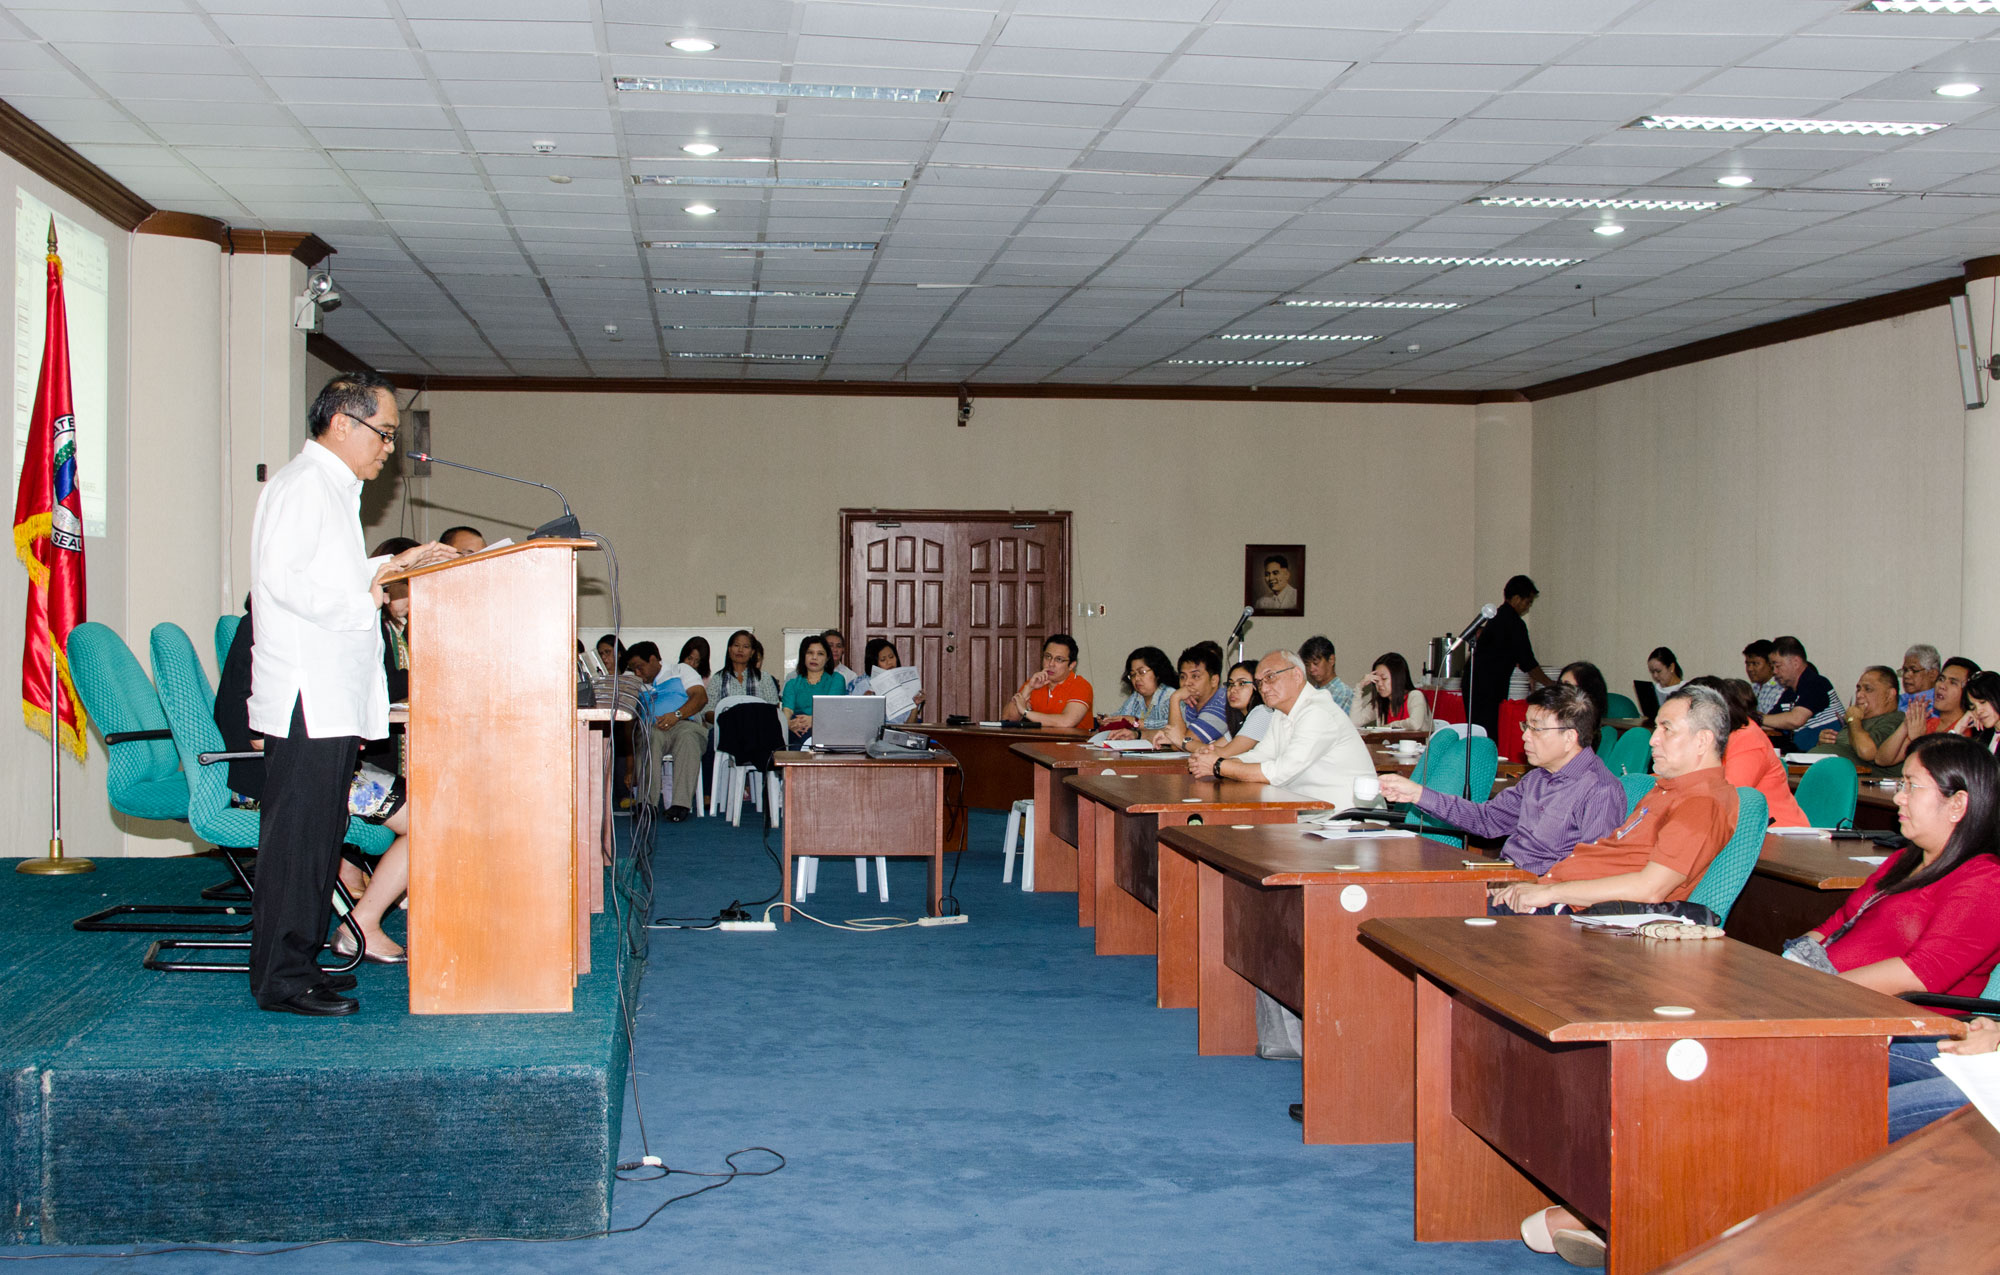 Senate Centennial Lecture Series Assessment Of The Bottom-Up Budgeting Process For FY 2015-GGM_7865.jpg